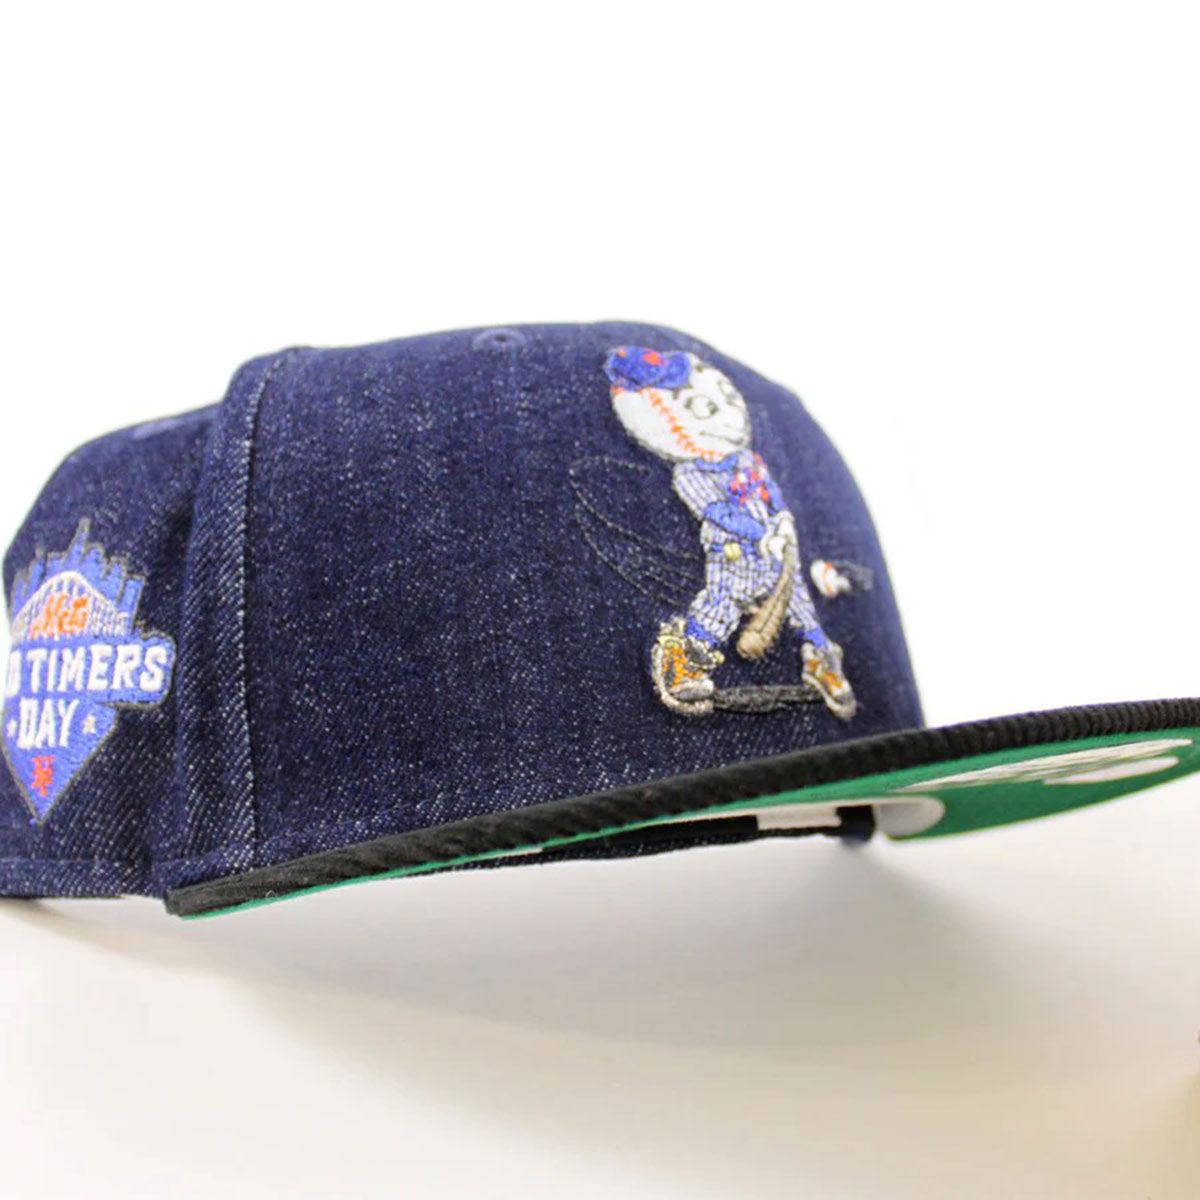 NEW ERA New York Mets - 59FIFTY OLD TIMERS DAY PATCH NAVY DENIM